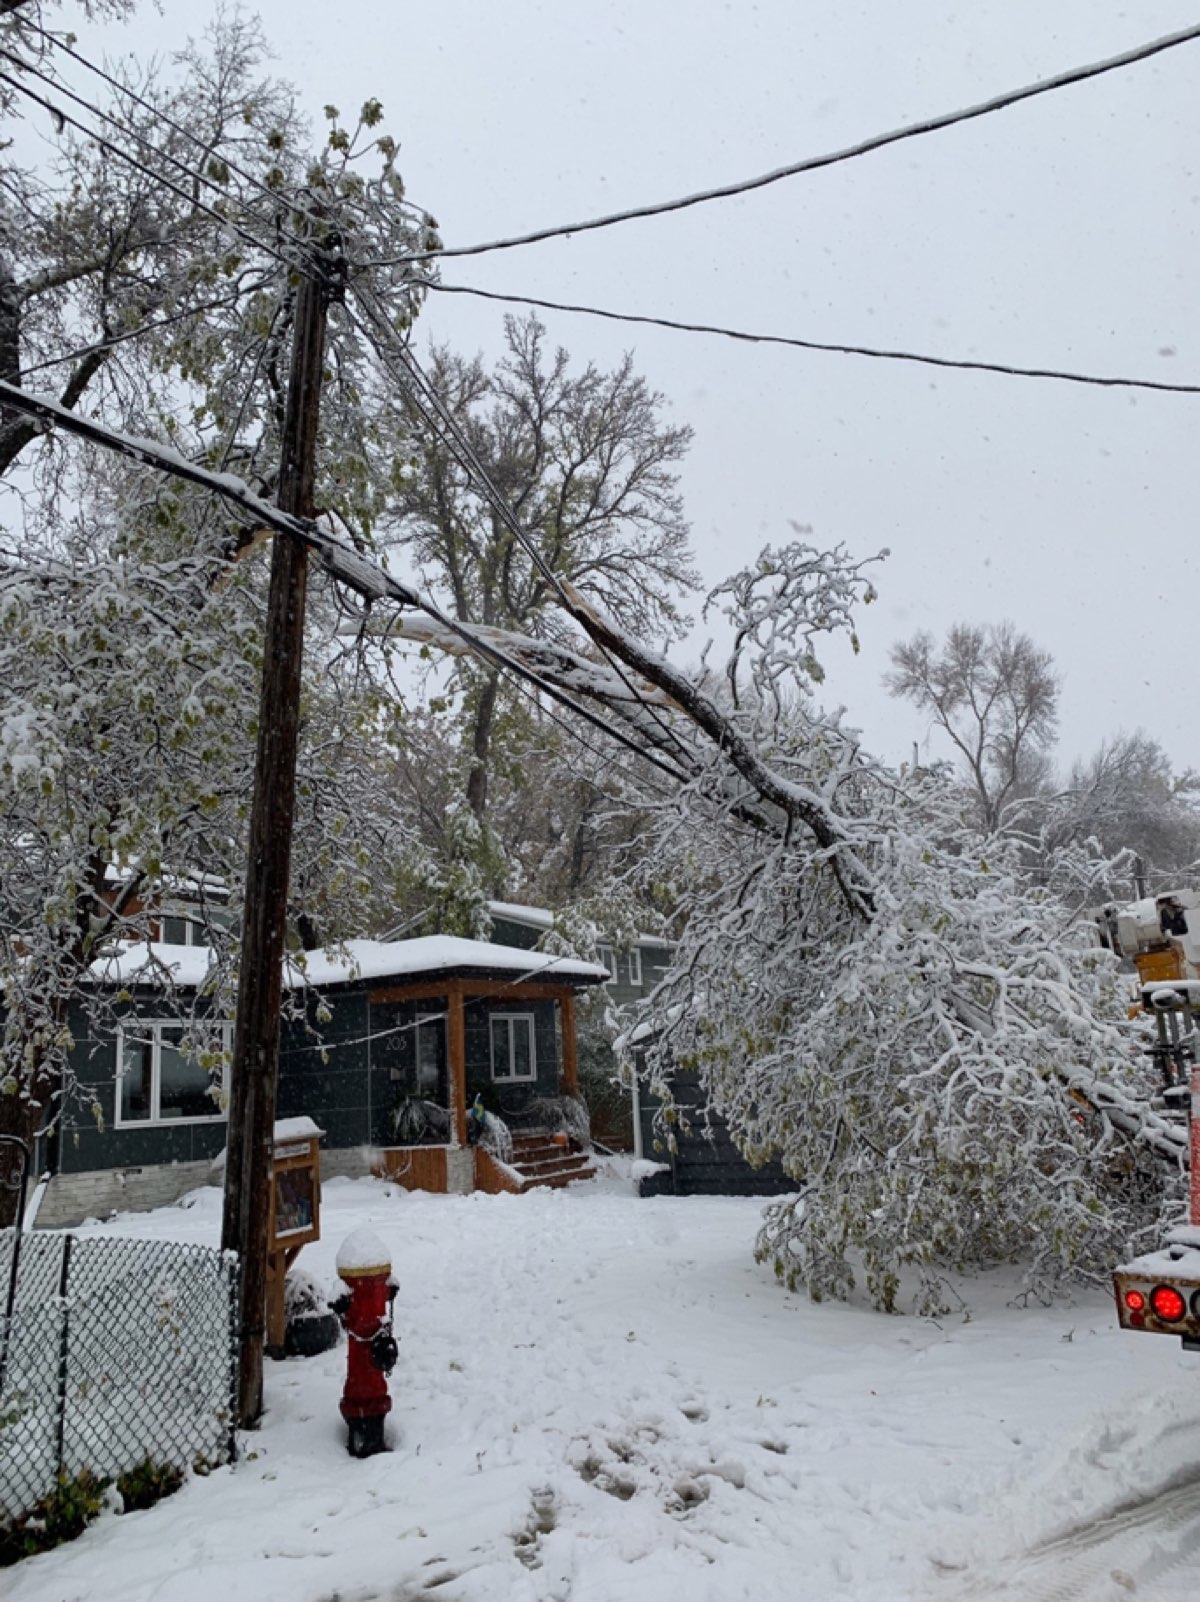 Southern Manitoba, and particularly Winnipeg, saw thousands of damaged trees falling onto distribution lines, causing outages